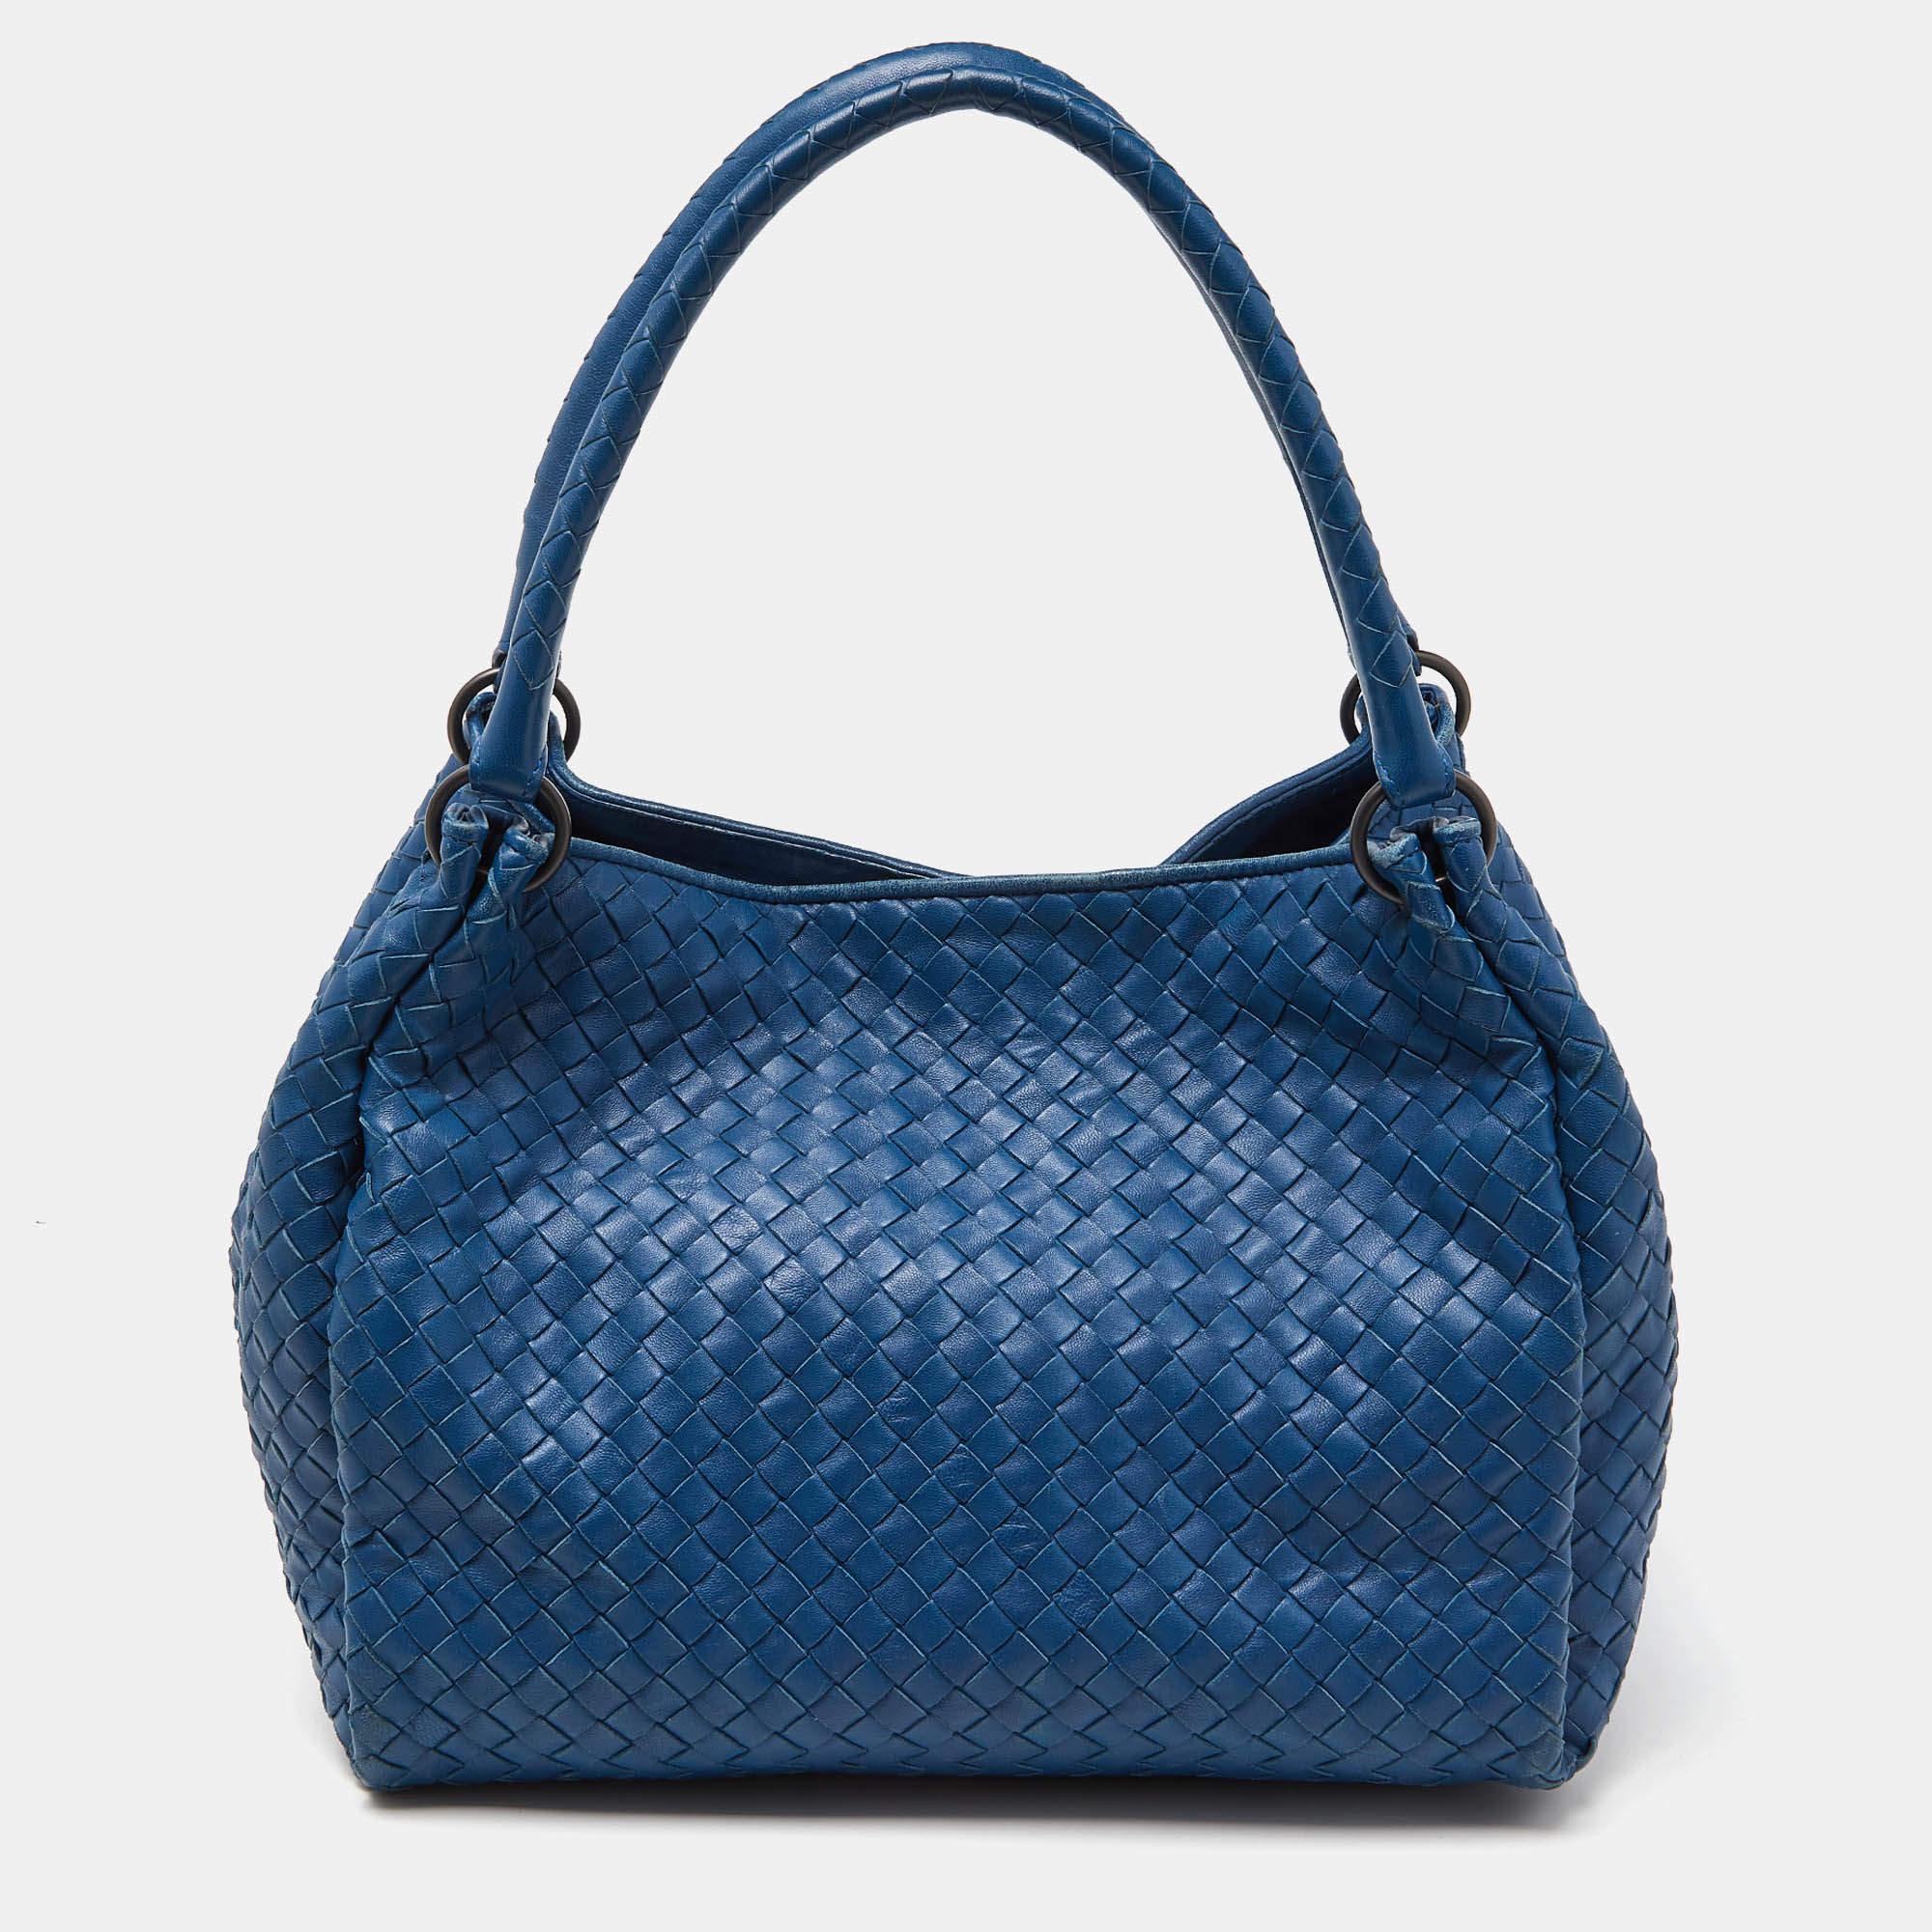 Crafted from quality materials, your wardrobe is missing out on this beautifully made Bottega Veneta bag. Look your fashionable best in any outfit, with this stylish shoulder bag that promises to elevate your ensemble.

